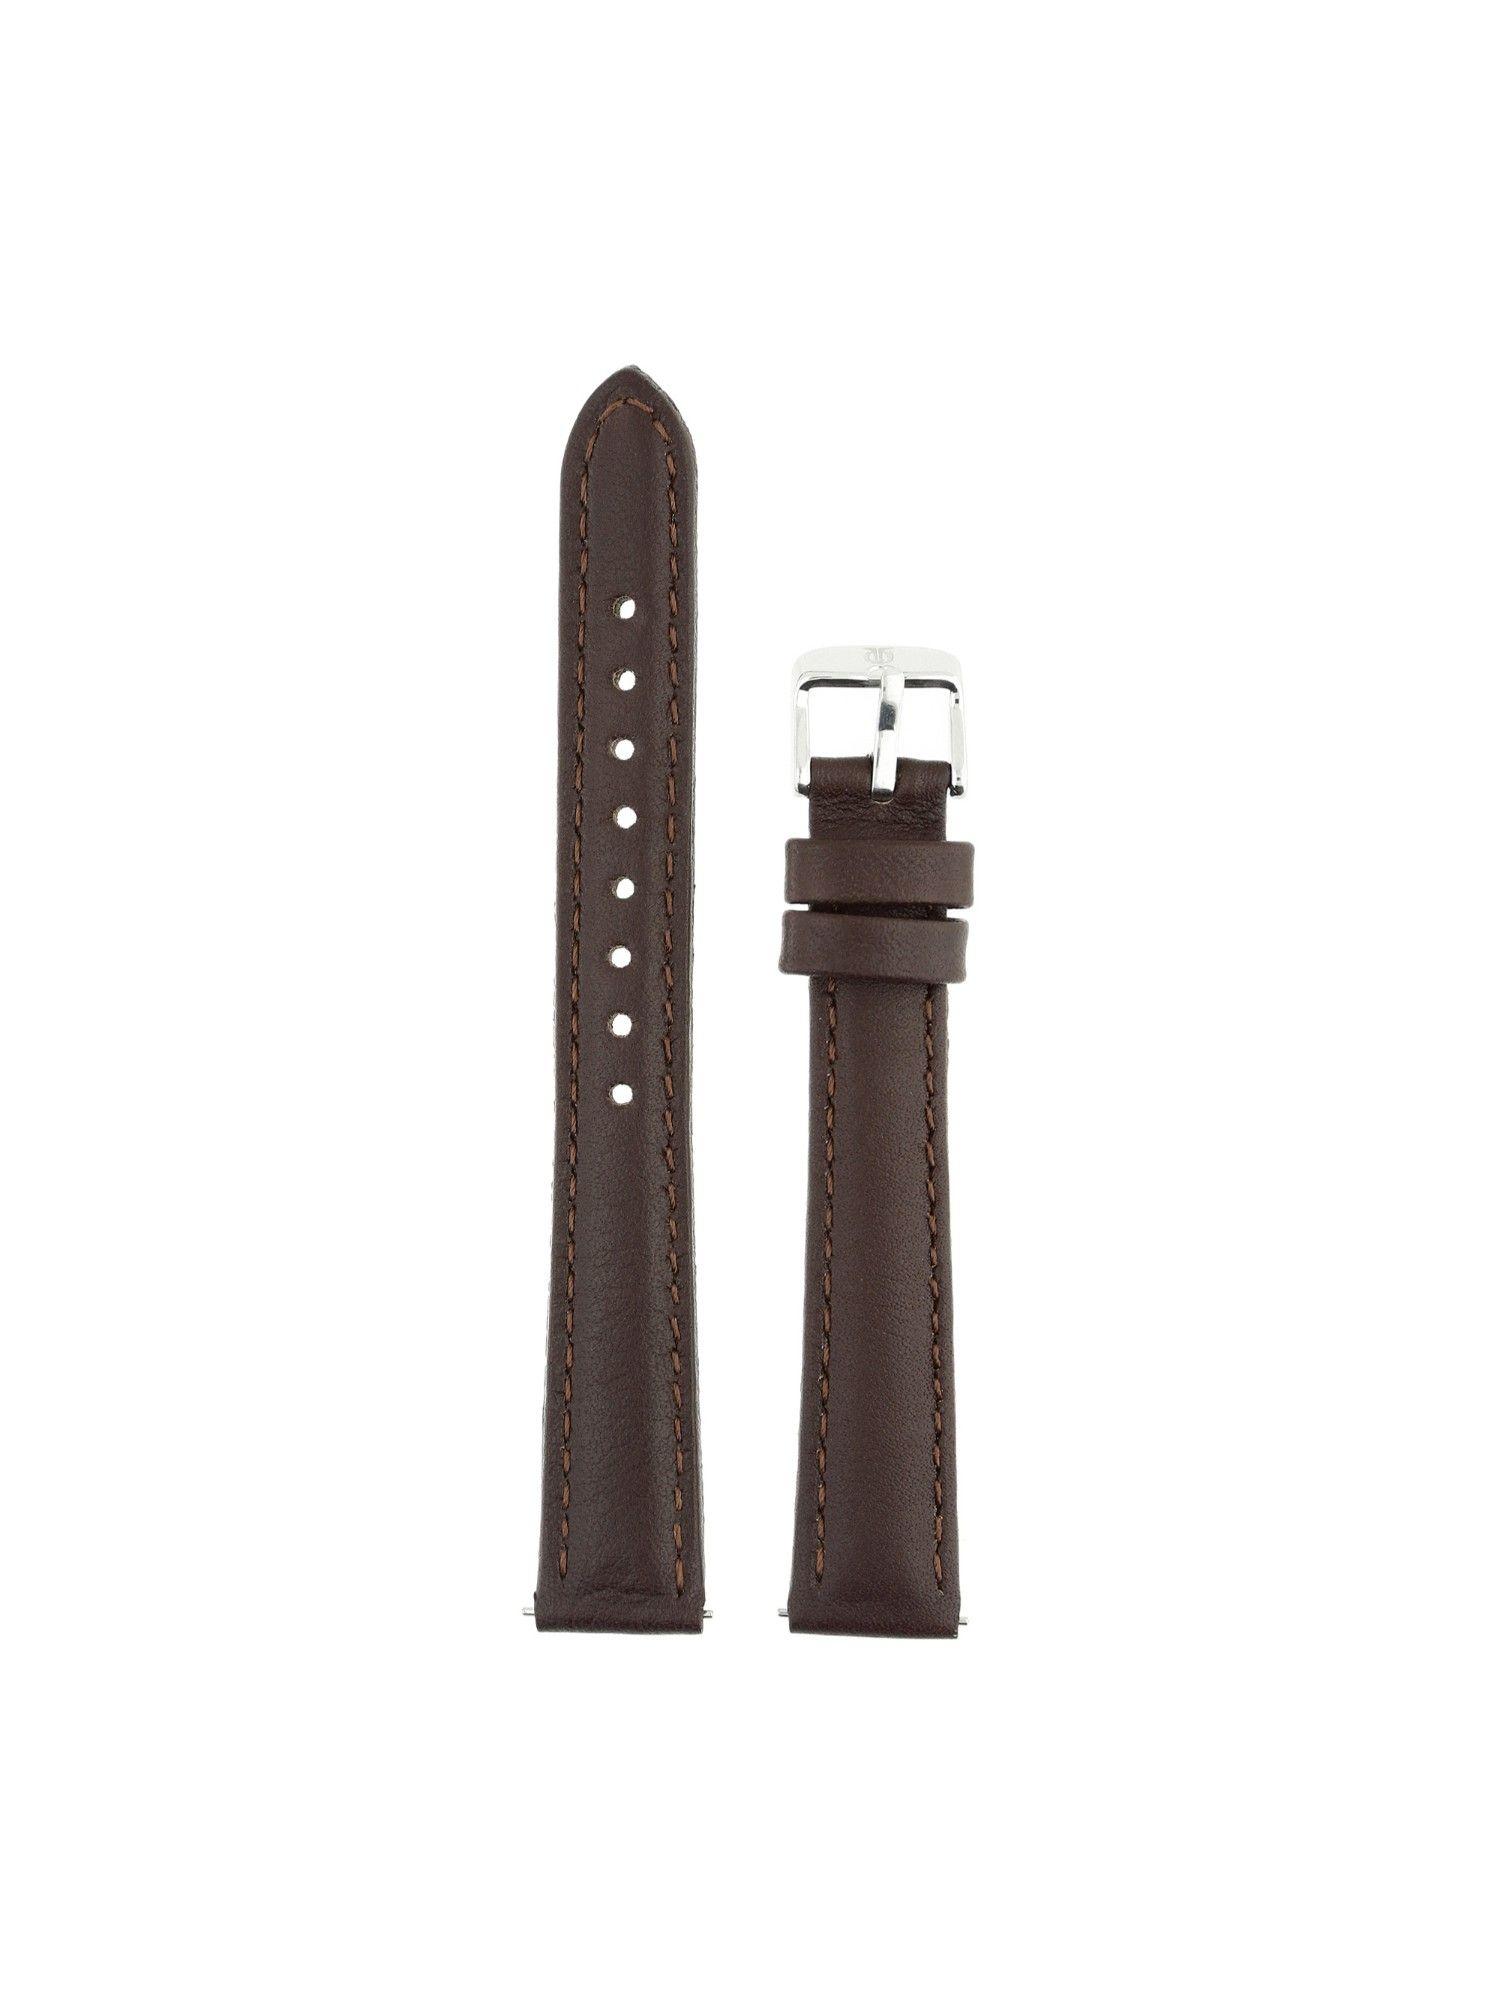 14-mm-brown-genuine-leather-strap-for-women-nf101011014sq-p